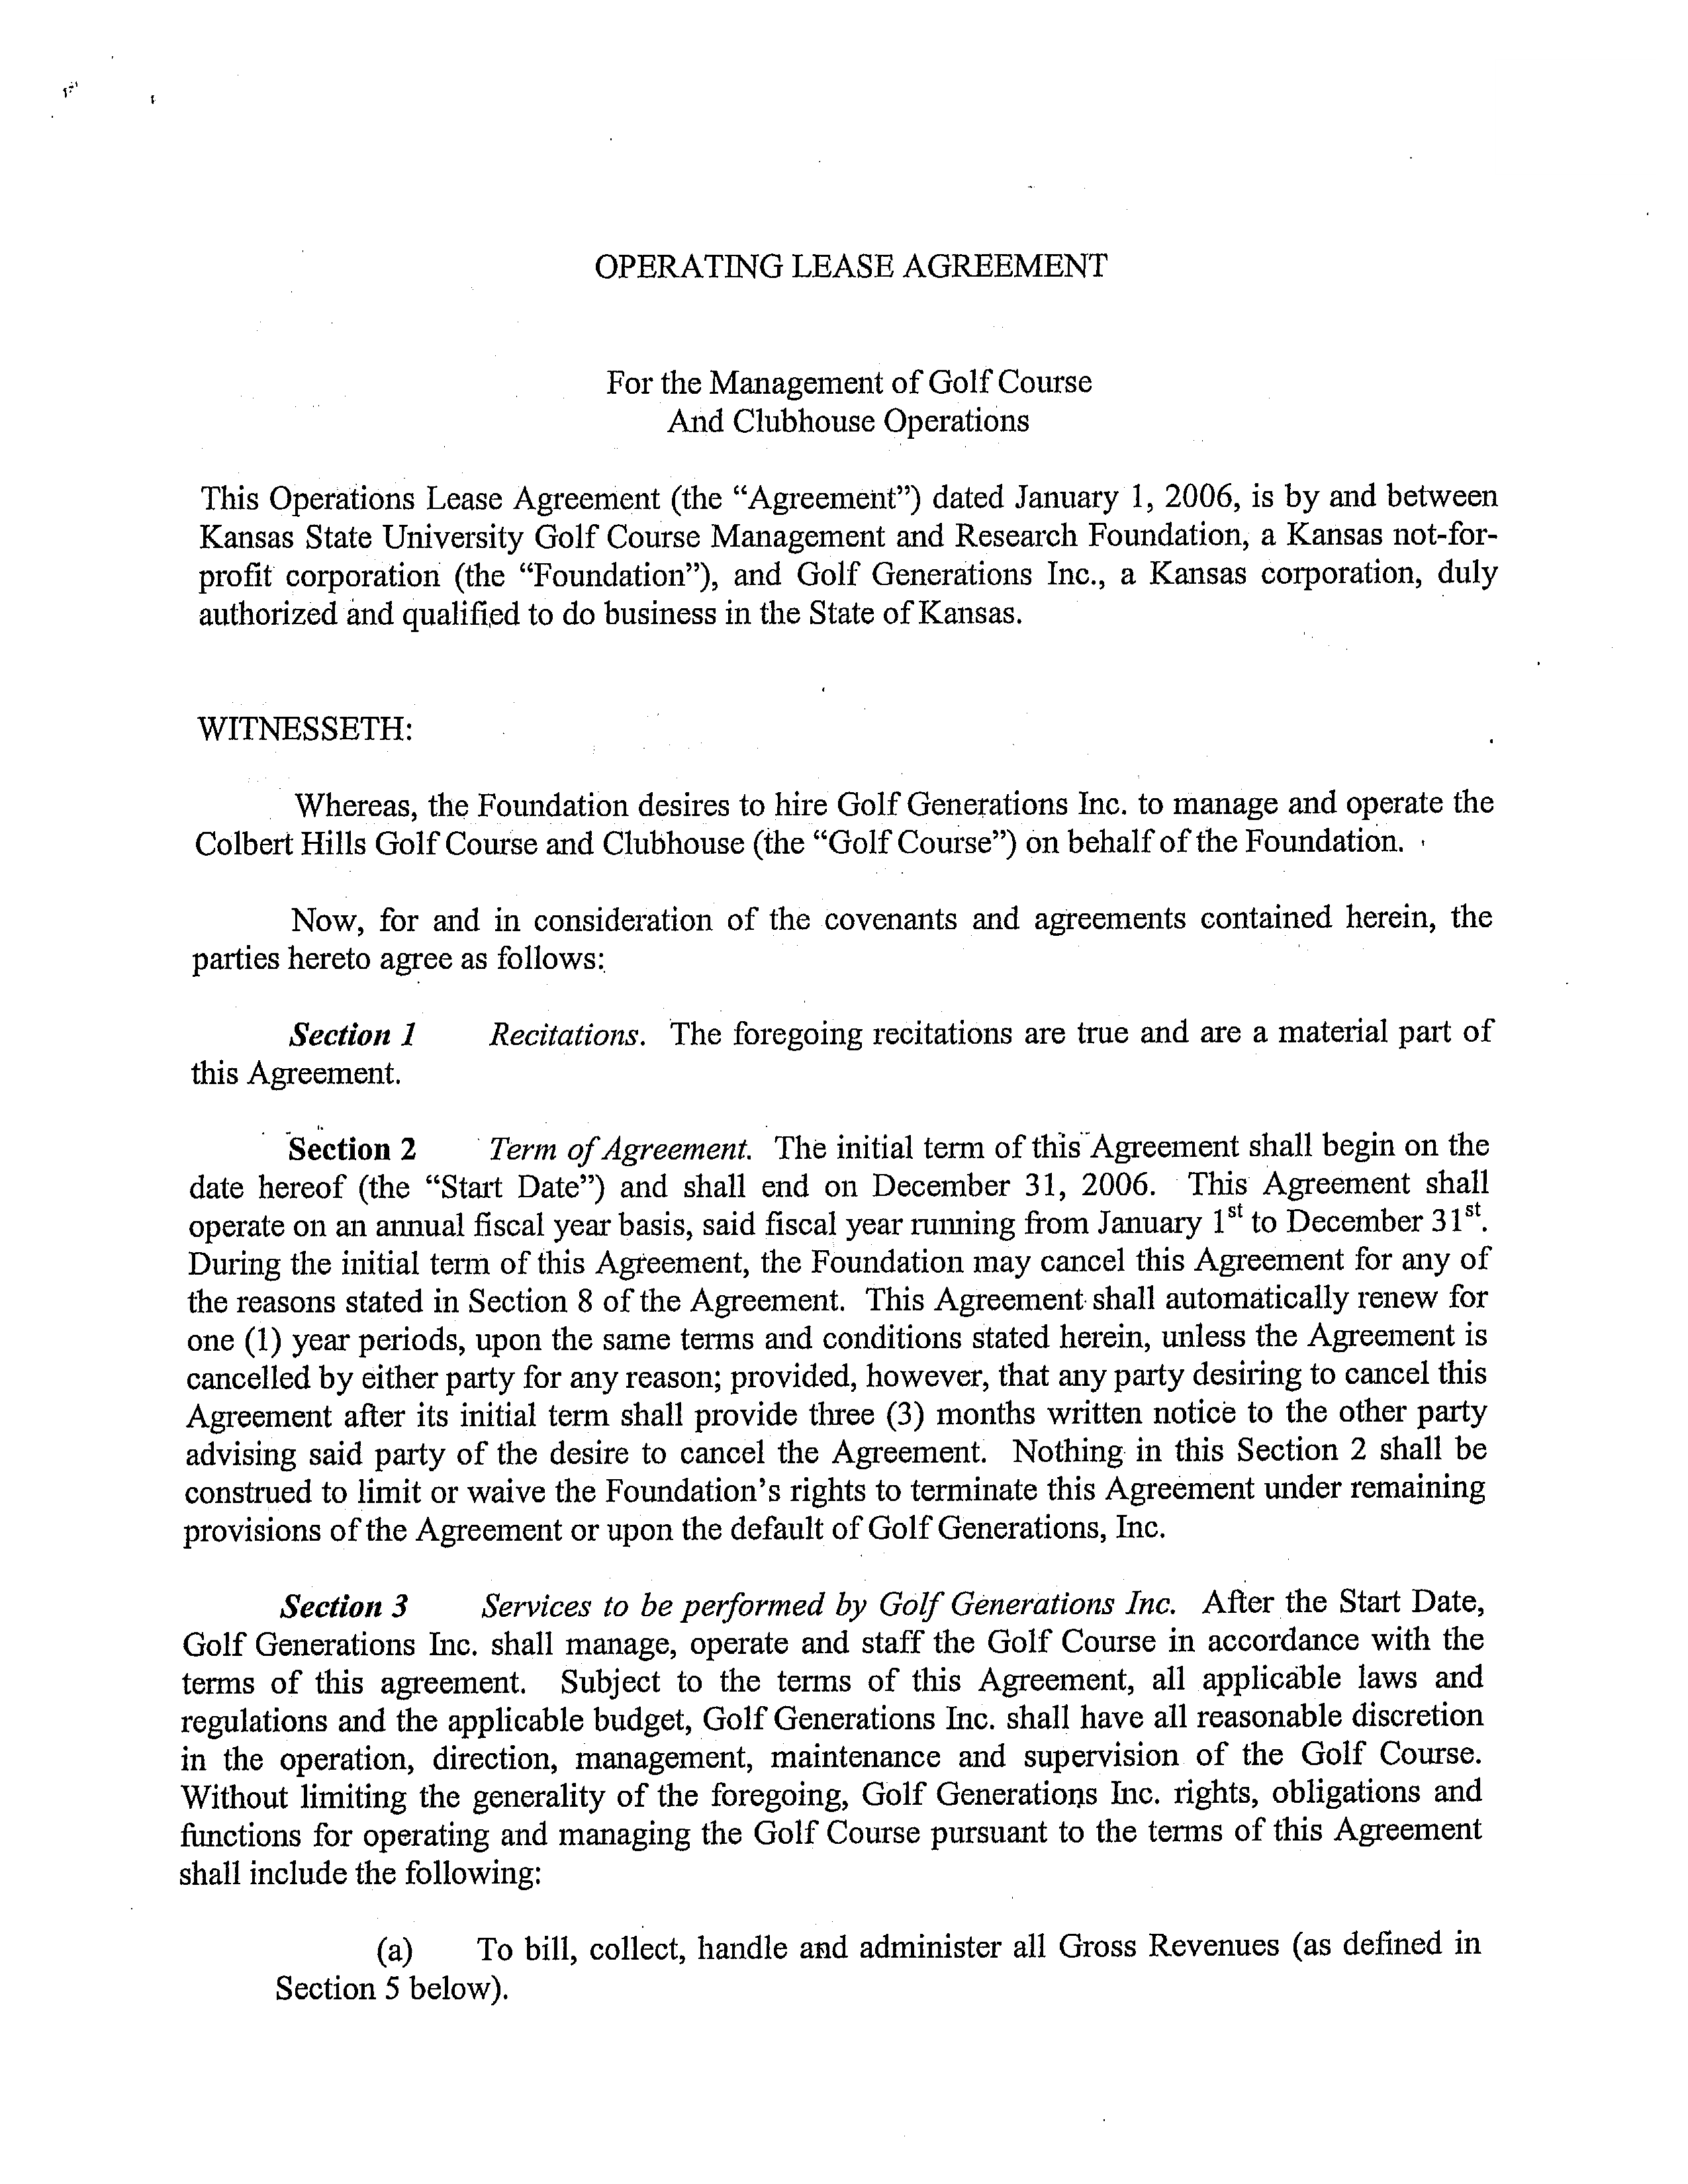 operating lease agreement template